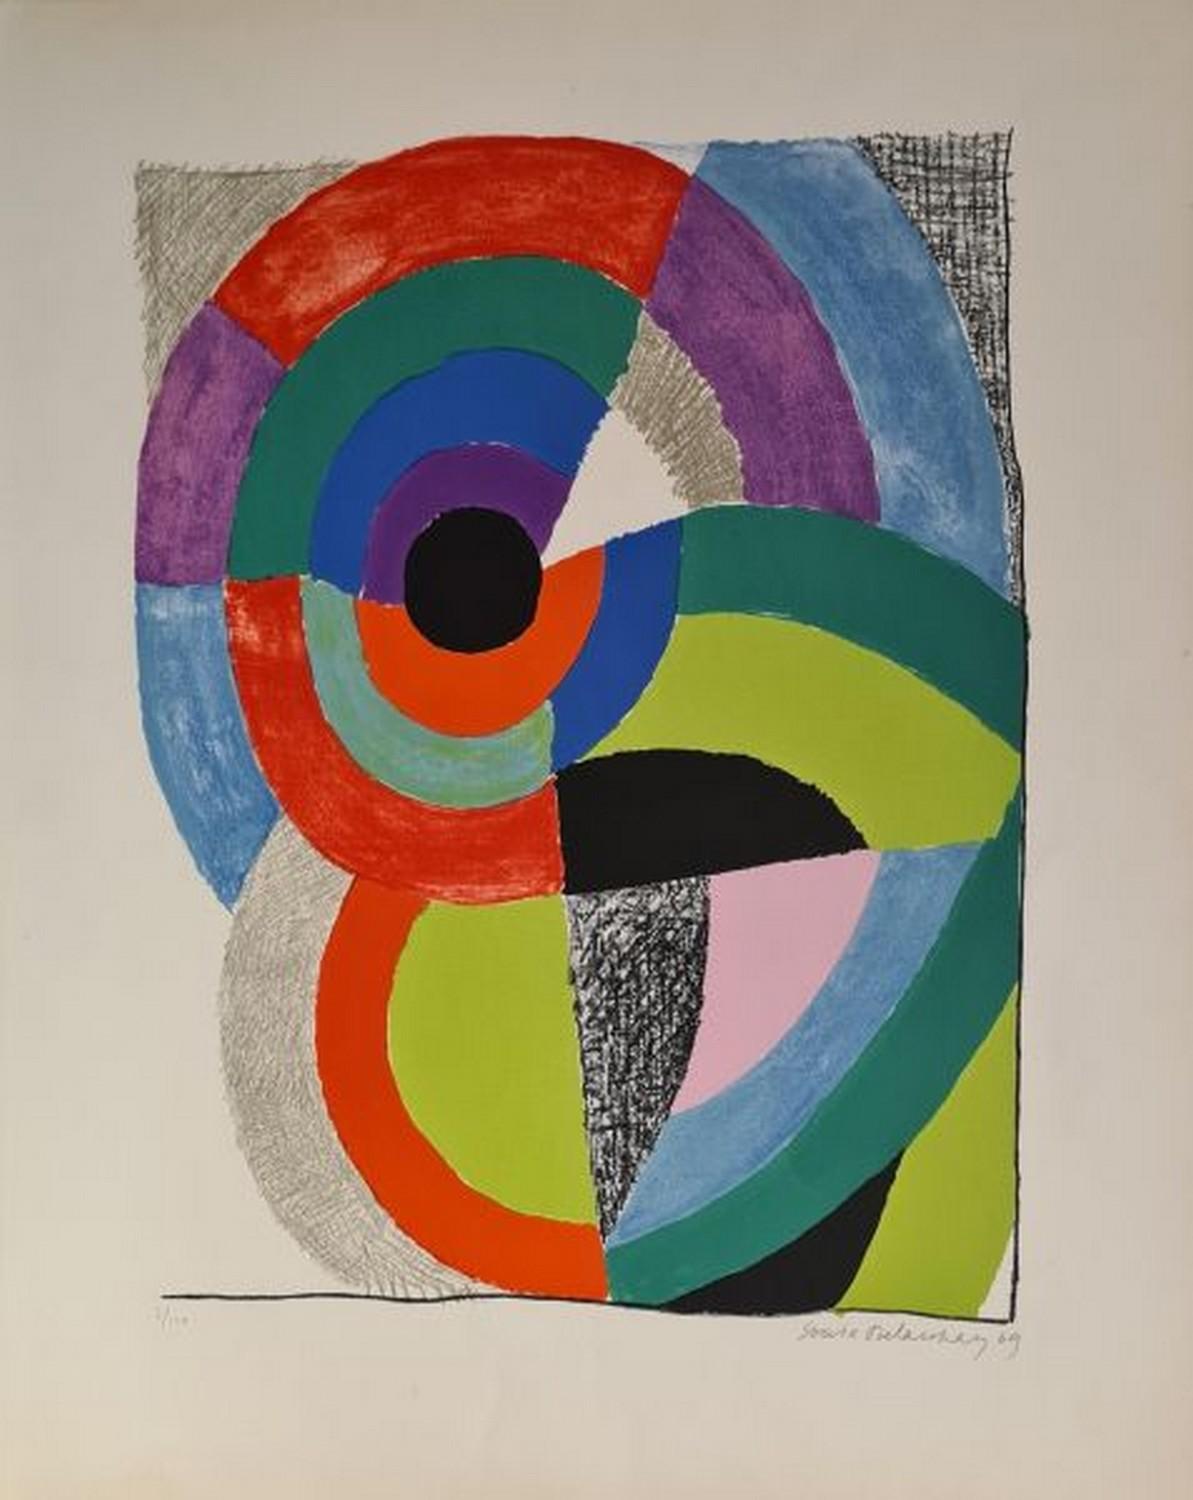 Sonia Delaunay Abstract Print - Composition orphique 